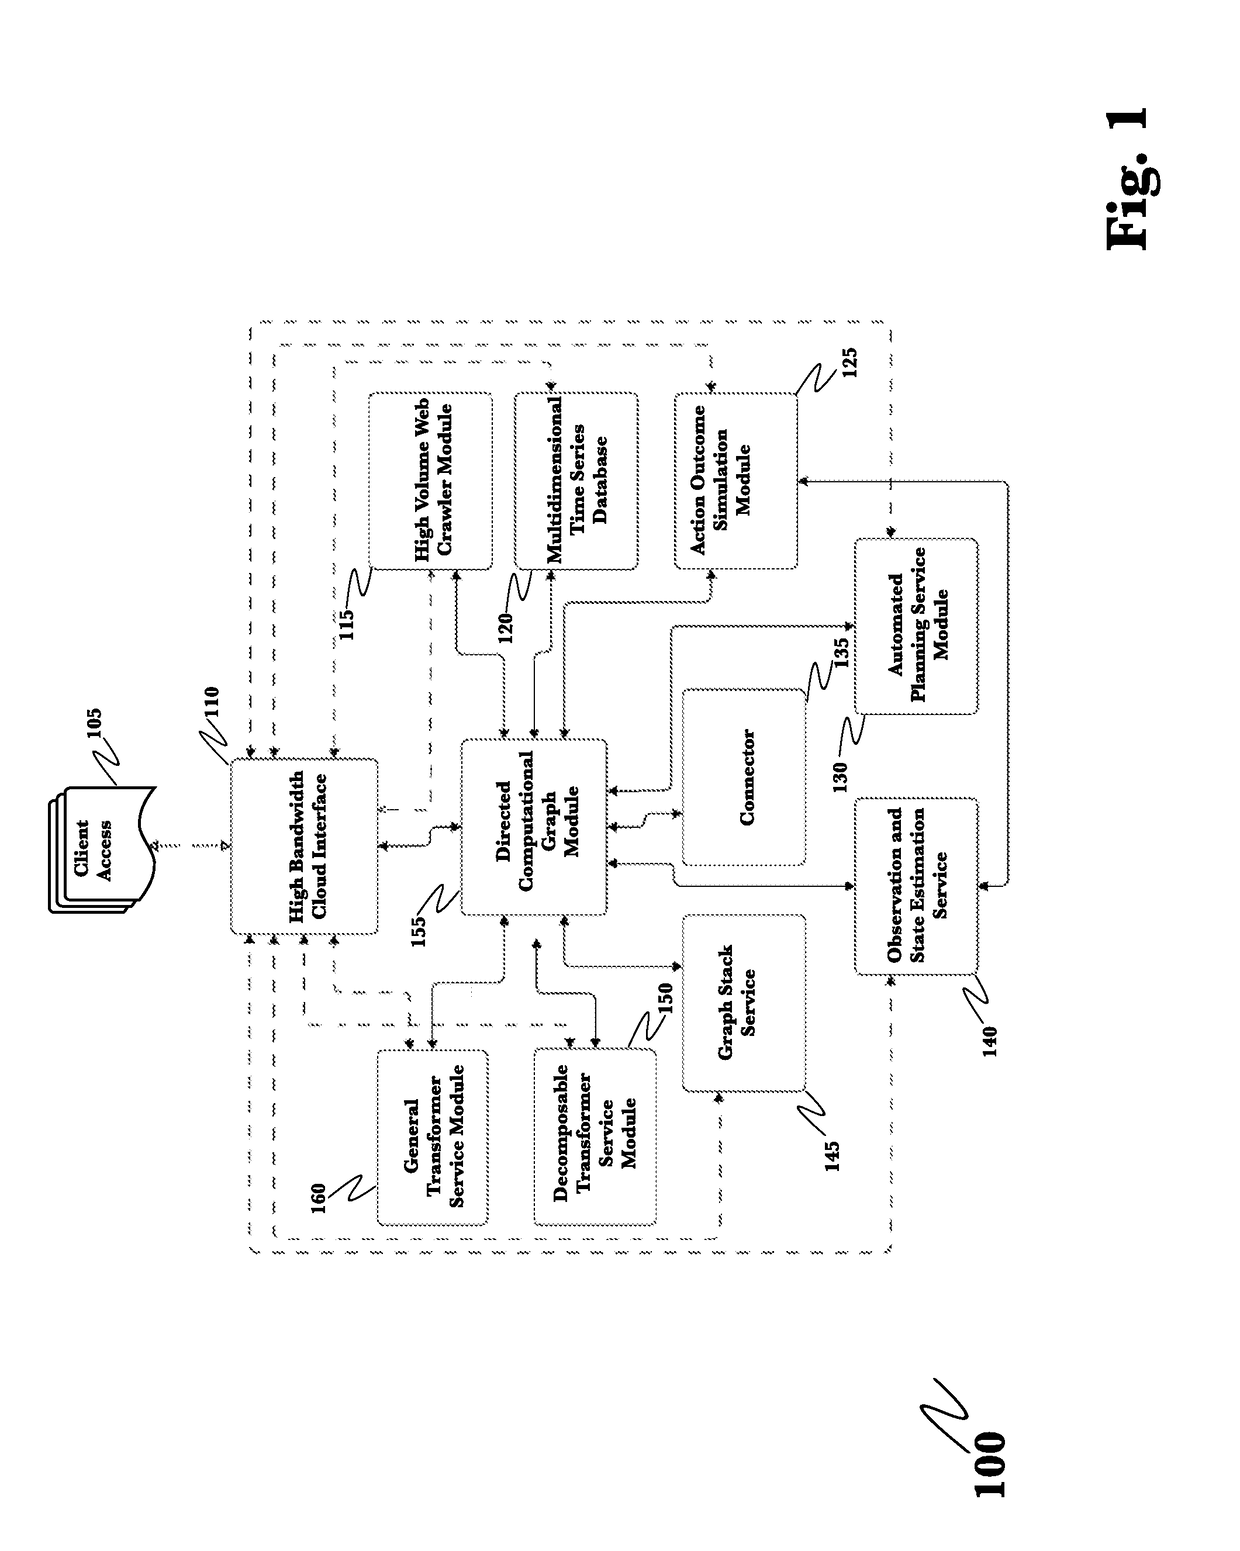 System for fully integrated capture, and analysis of business information resulting in predictive decision making and simulation